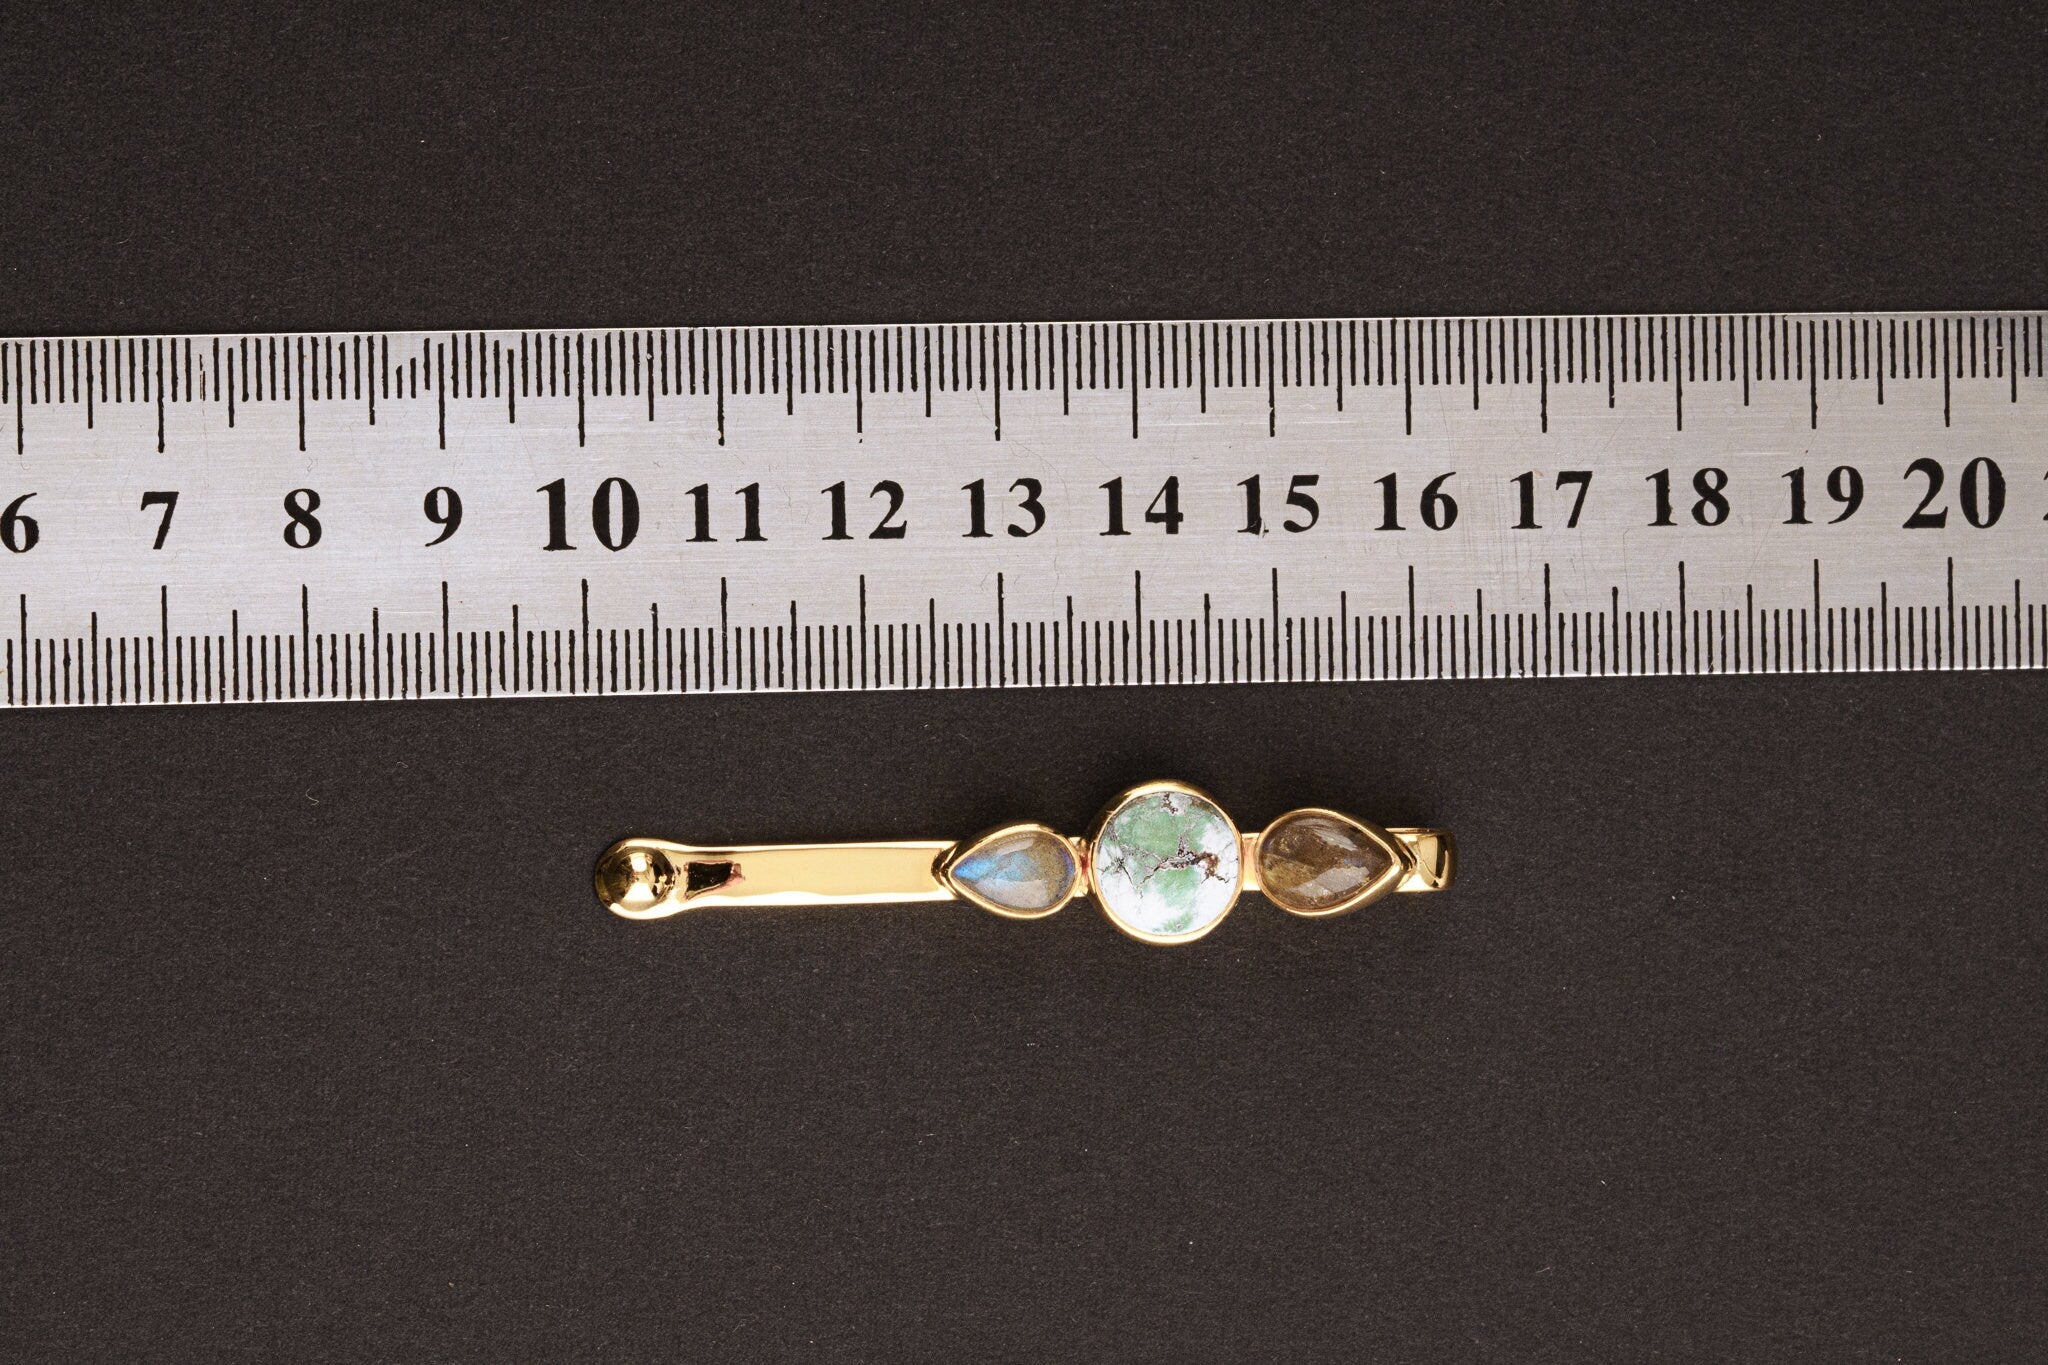 Gem Labradorite & Chrysocolla - Inverted Indian Ceremonial Spoon / Scoop Necklace - 16K Gold plated Cast Sterling Silver